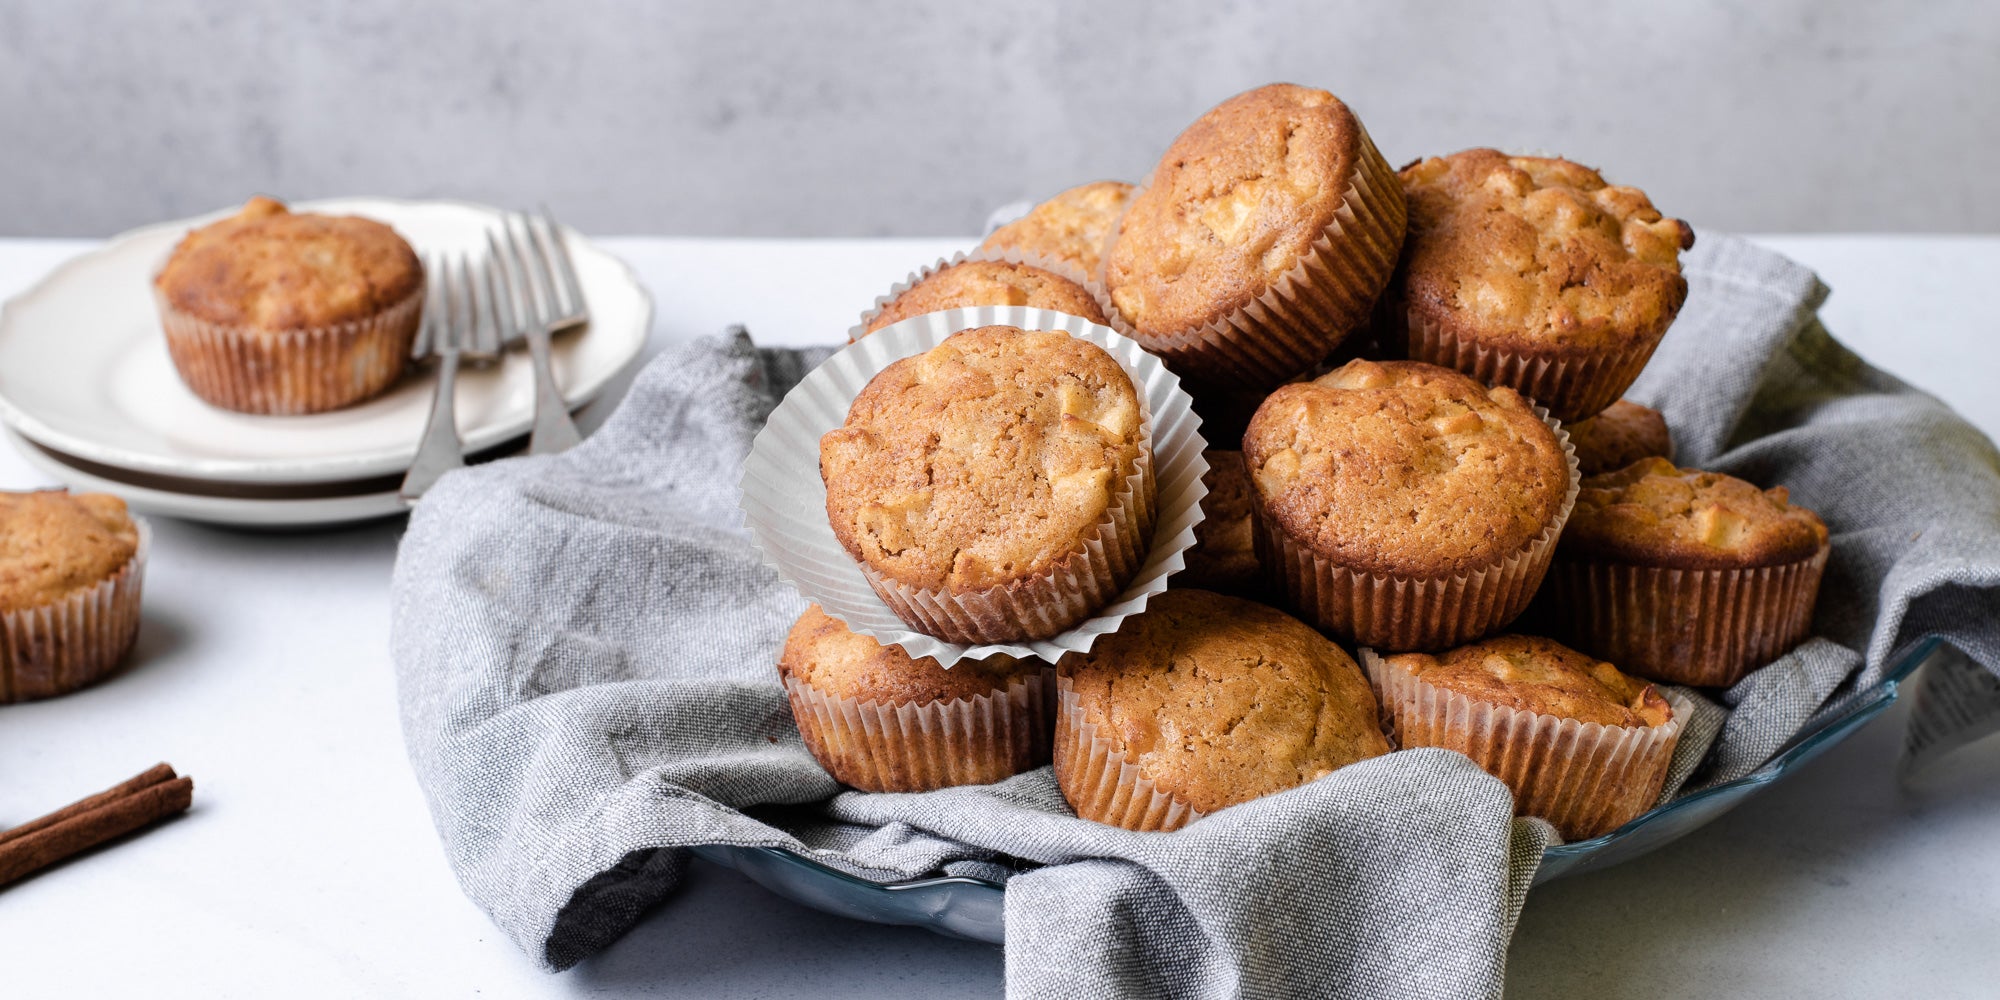 A pile of Calorie Conscious Apple & Cinnamon Muffins on a grey cloth, with a muffin on a plate with forks in the background